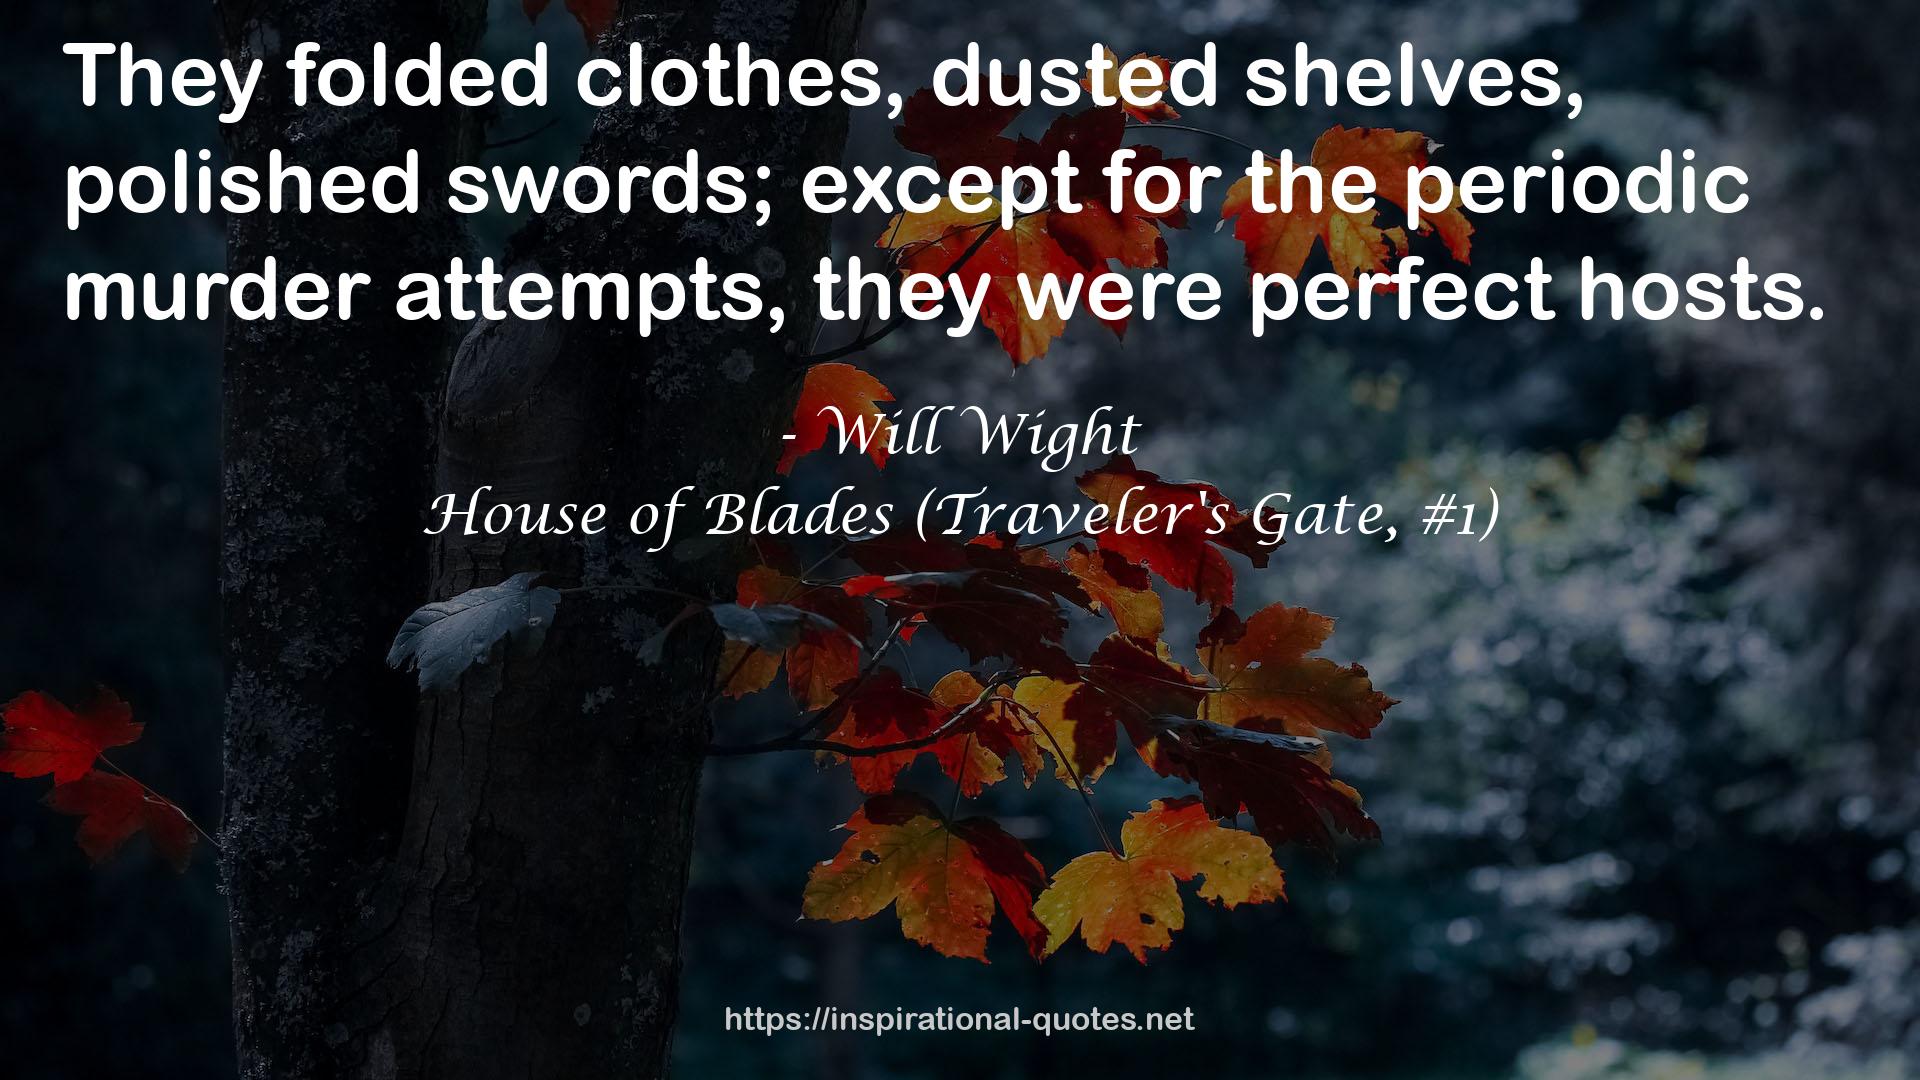 House of Blades (Traveler's Gate, #1) QUOTES